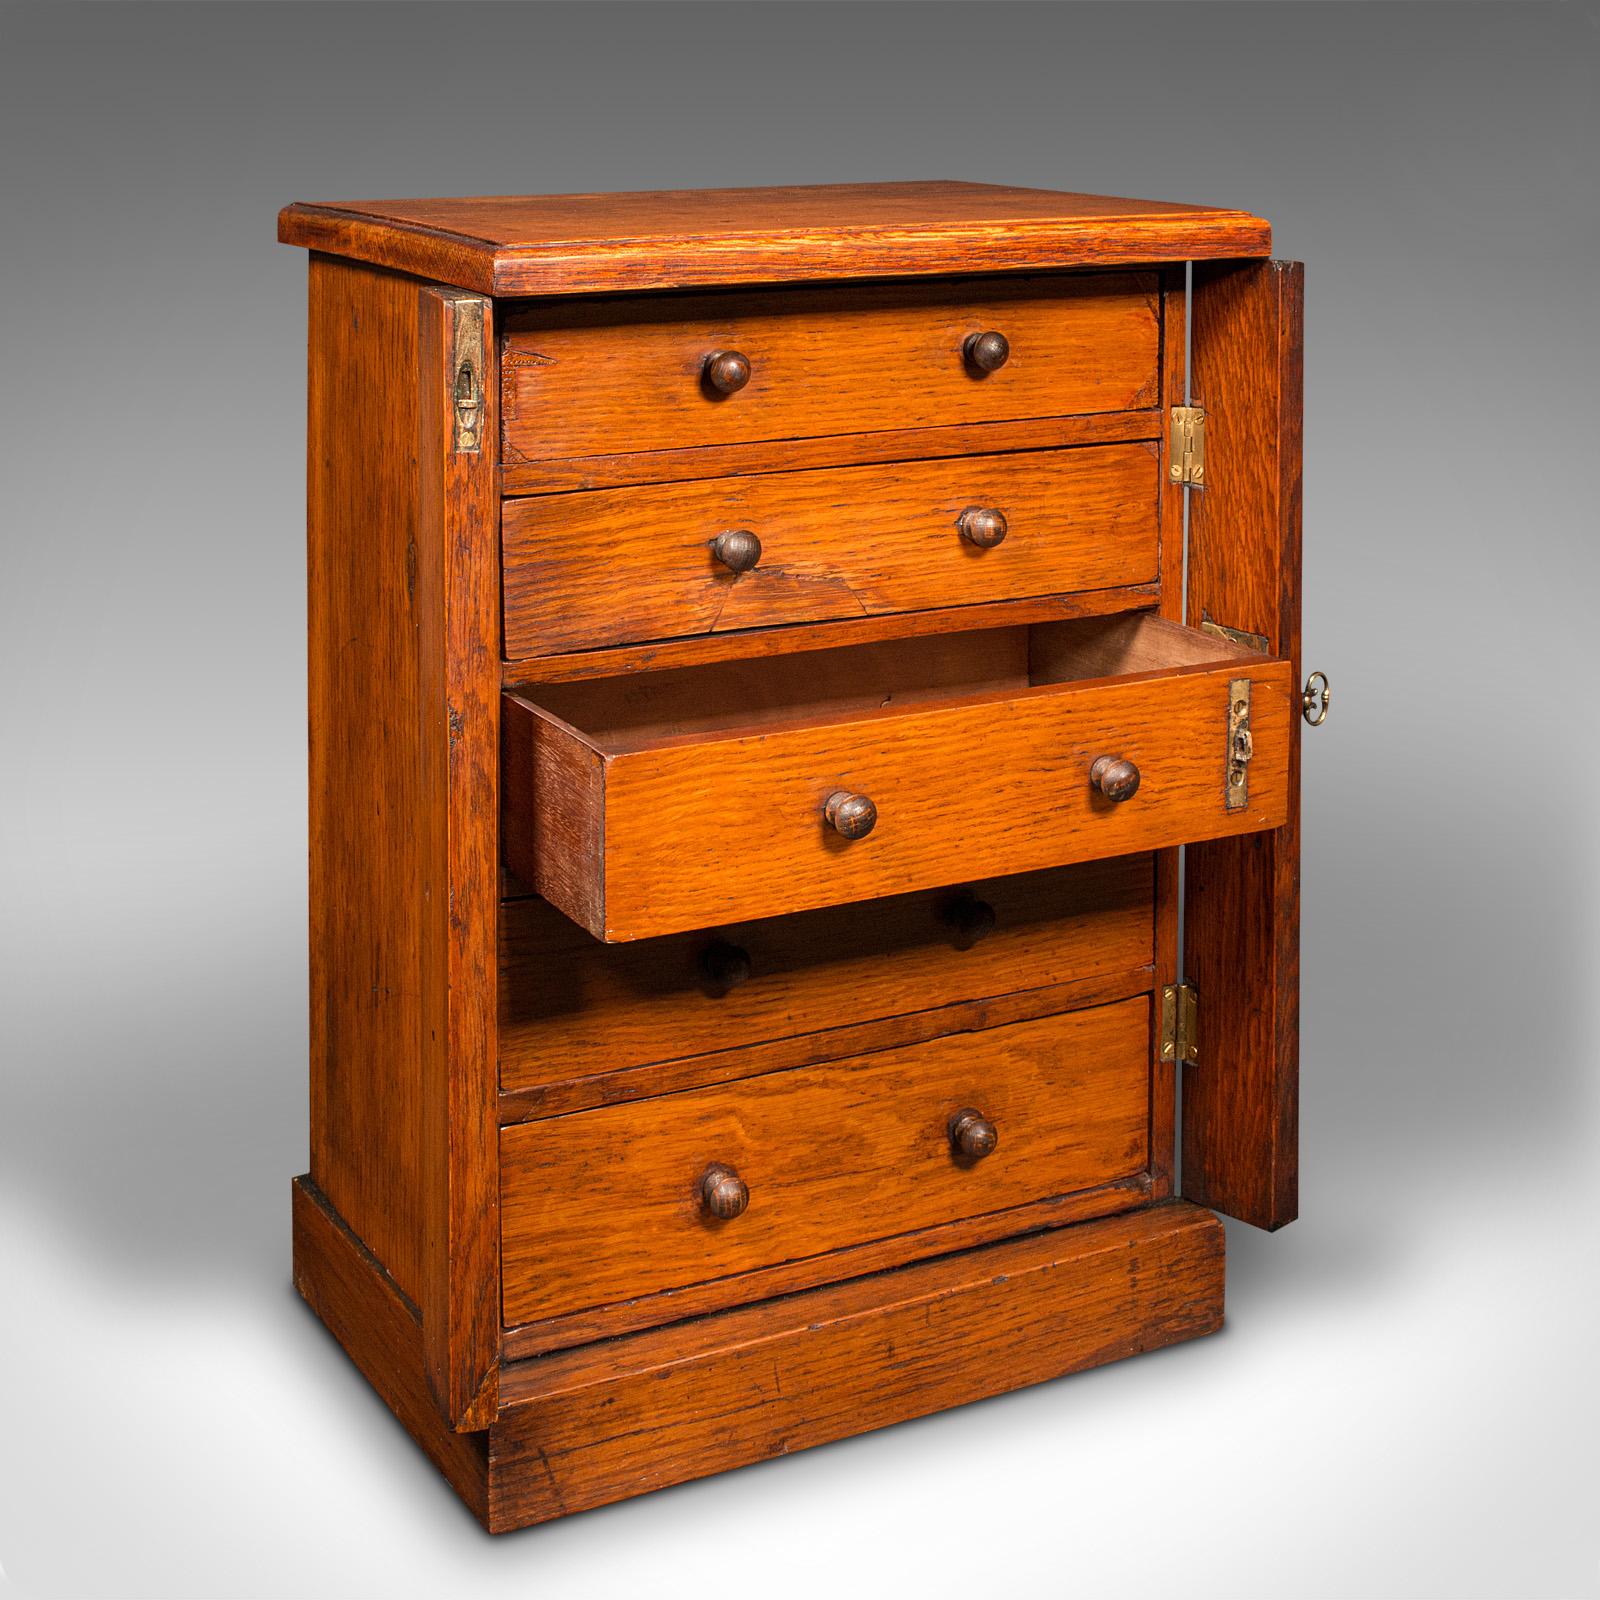 This is an antique Wellington chest of drawers. An English, oak specimen cabinet, dating to the early Victorian period, circa 1850.

Delightful small cabinet of drawers, perfect for the collector
Displays a desirable aged patina and in good